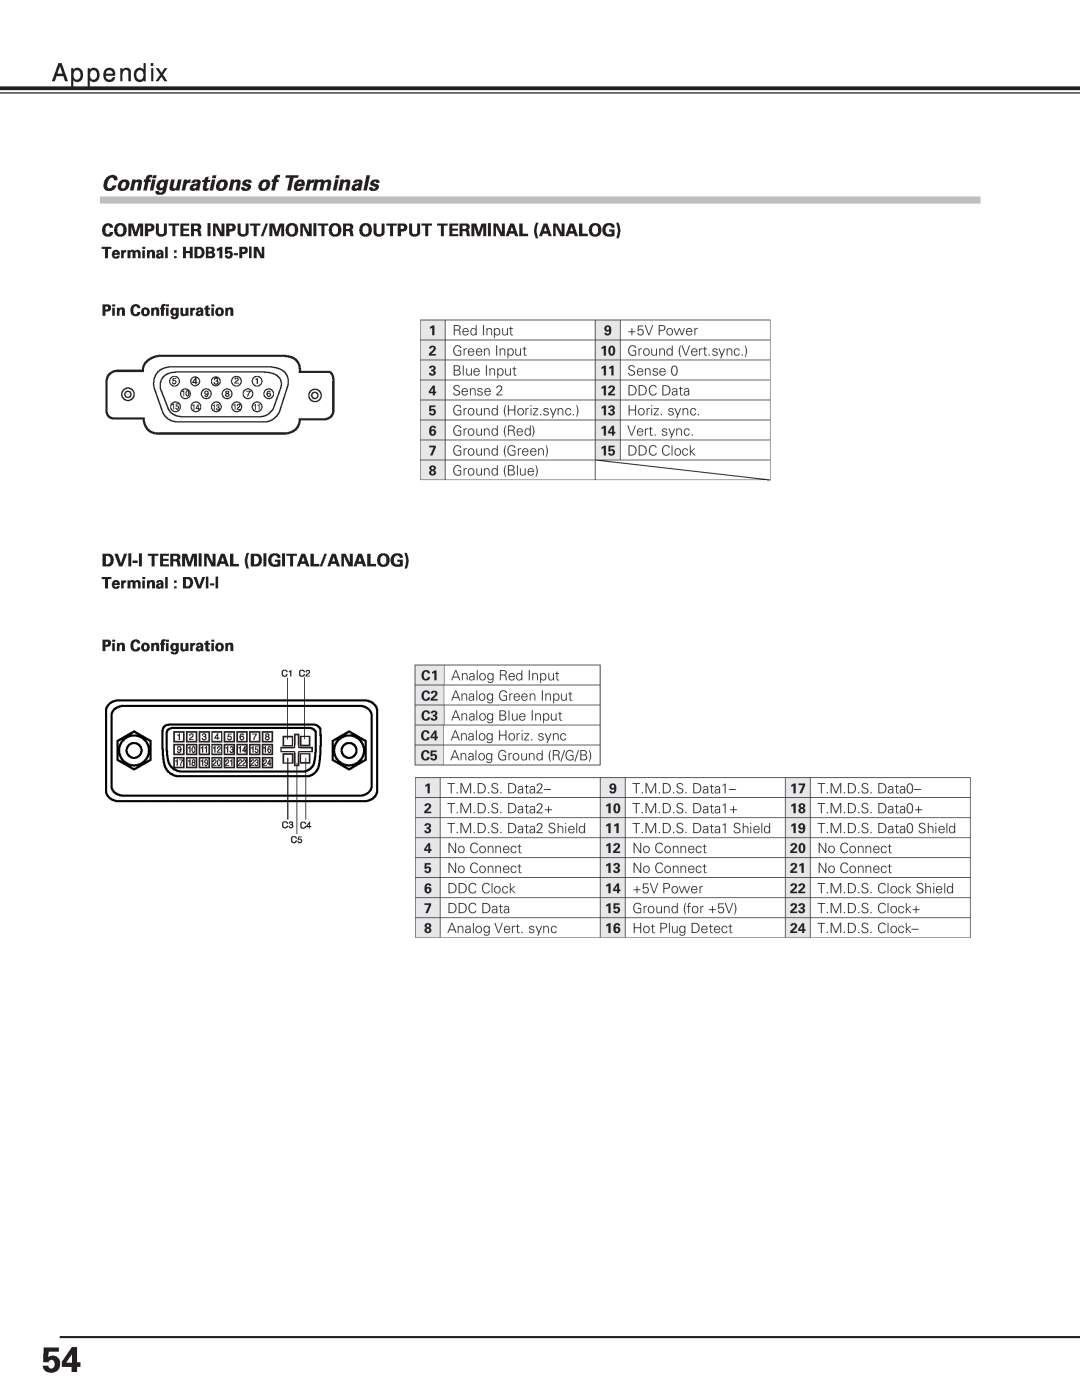 Eiki LC-XE10 Configurations of Terminals, Appendix, Terminal : HDB15-PIN Pin Configuration, Analog Red Input, No Connect 